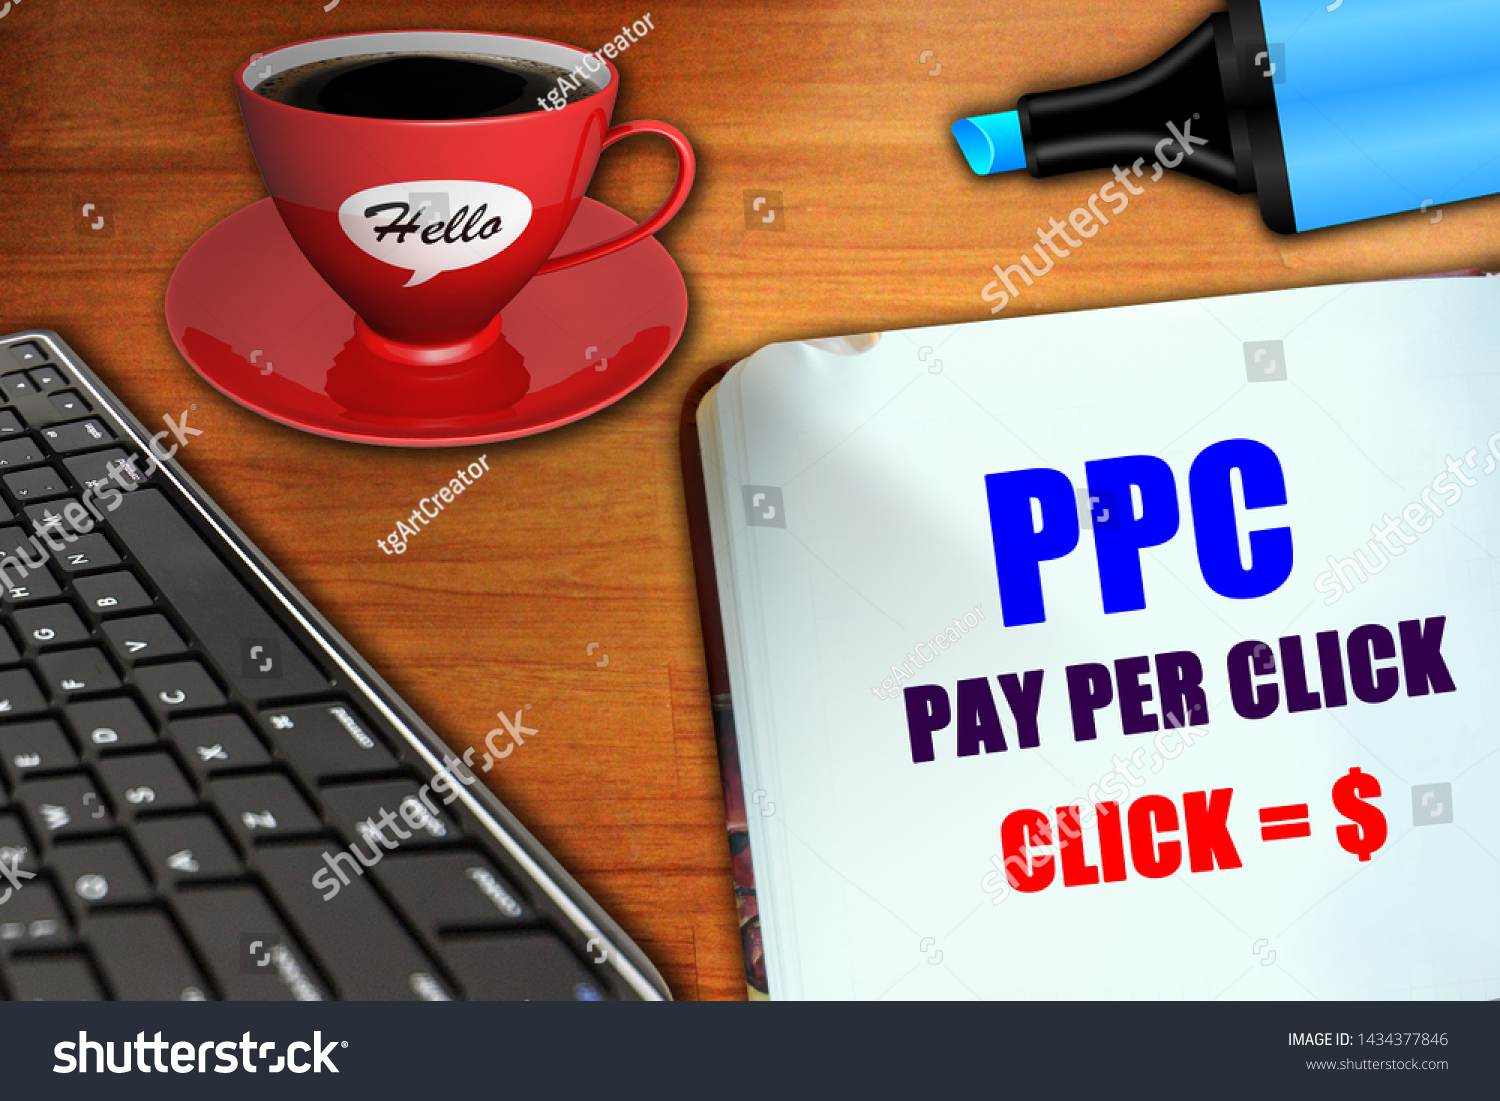 Notepad with word PPC pay per click concept. #1434377846